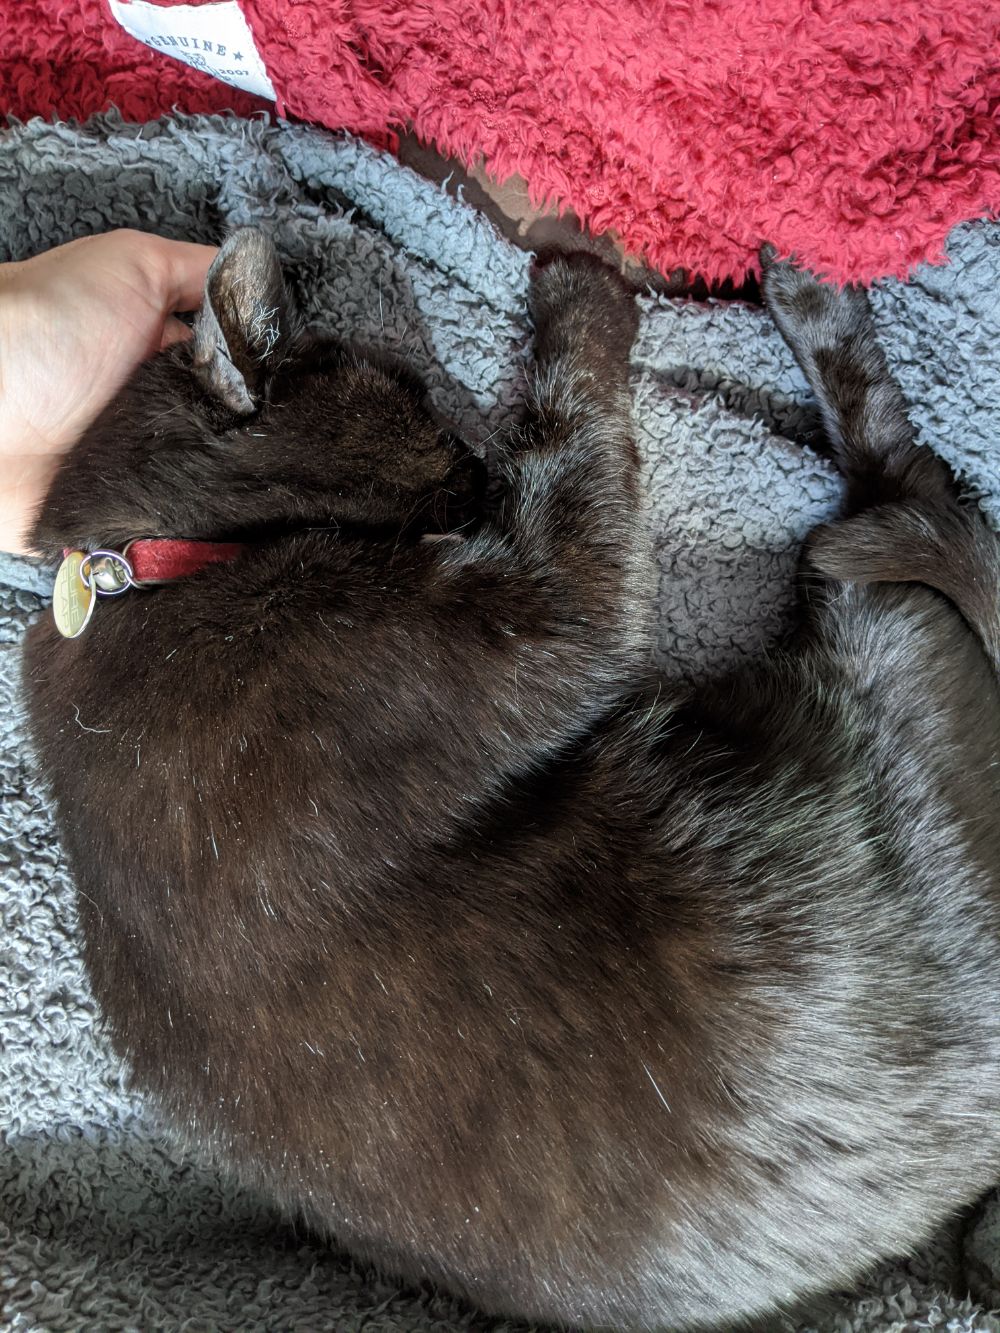 Black cat lying curled up, with his head resting fully on Jamie's hand, as if it were a pillow